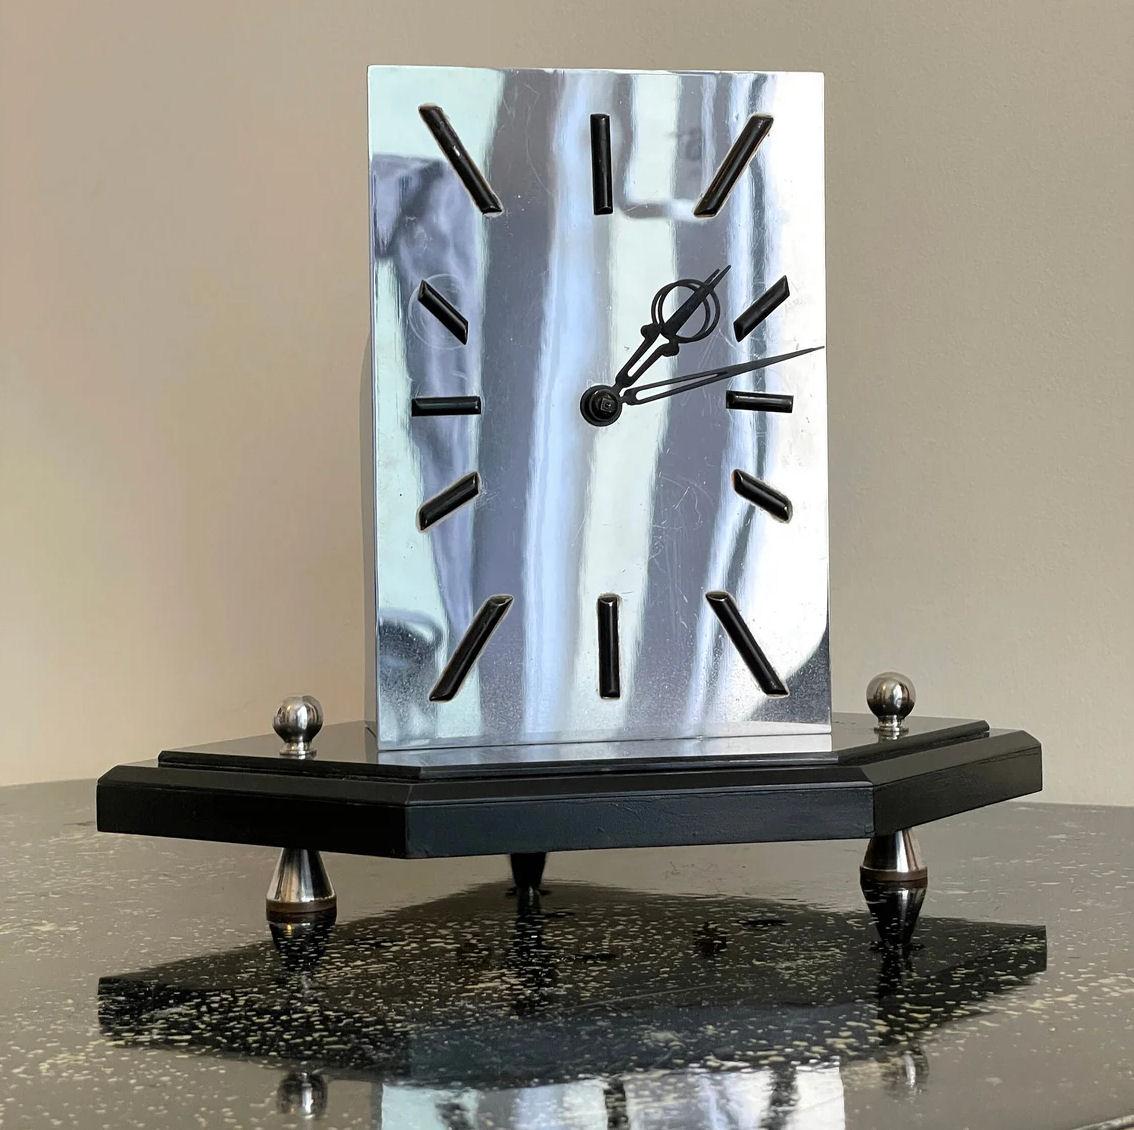 Art Deco Modernist 8 Day Chrome Mantle Clock by Smiths, English, c1936 4